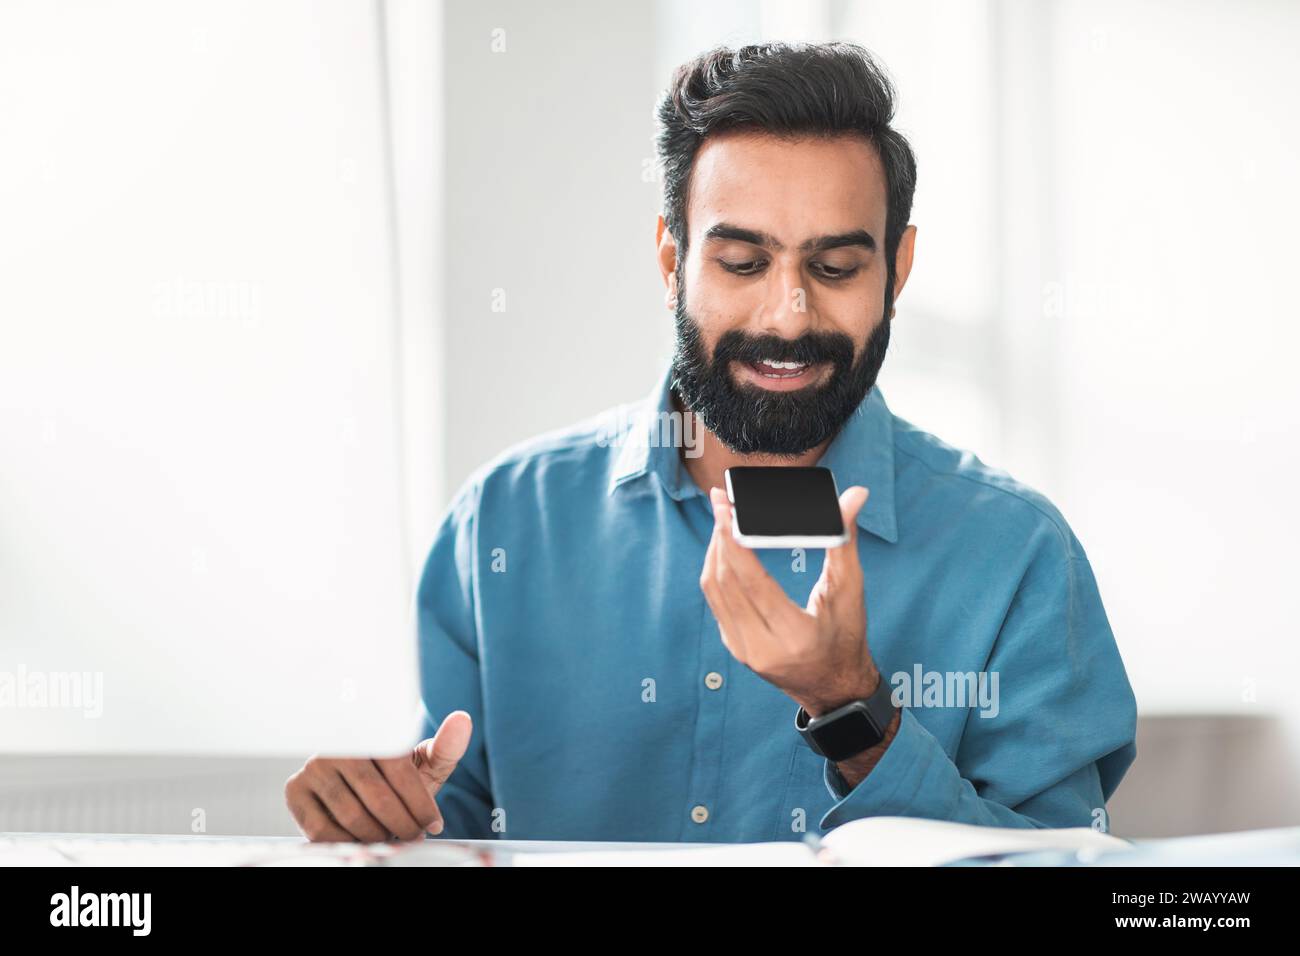 Hindu businessman with beard using voice assistant on phone Stock Photo